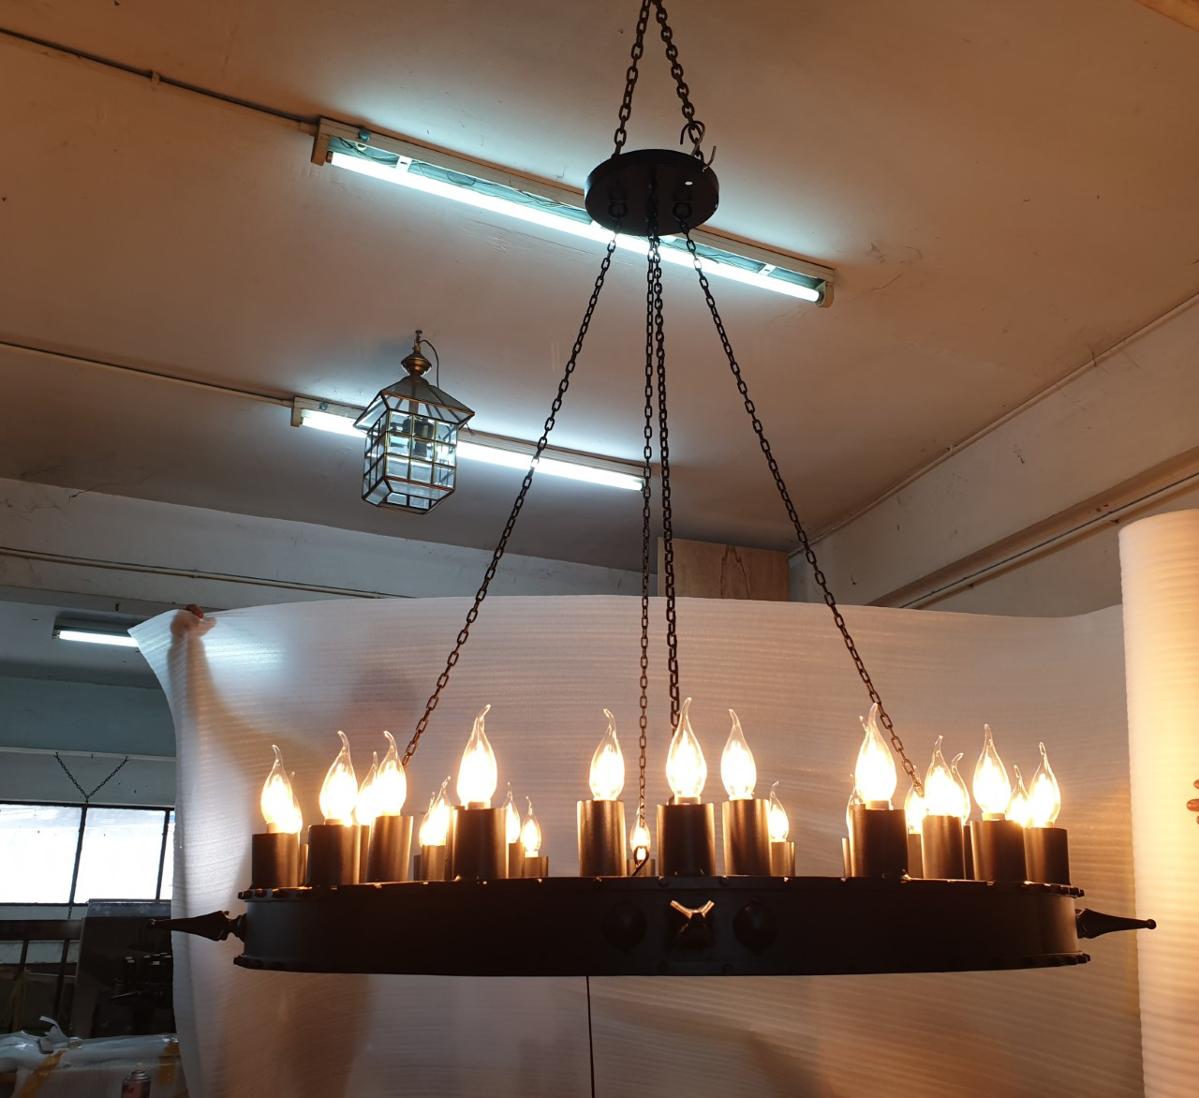 Iron Lamp 32 light Item Code IRL100 size wide 1000 mm.(circle) total wide 1200 mm. long 1100 mm.